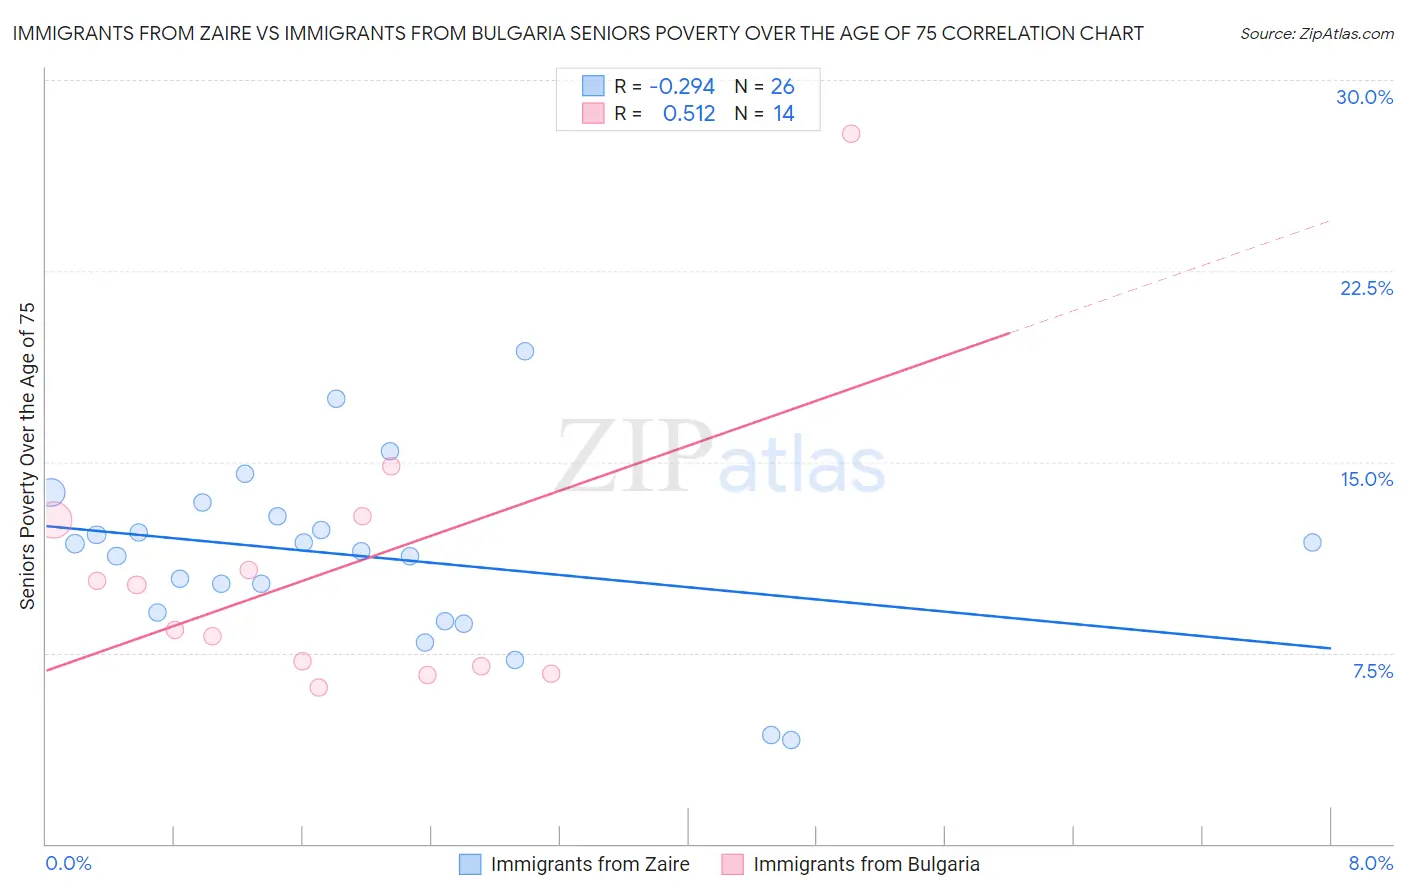 Immigrants from Zaire vs Immigrants from Bulgaria Seniors Poverty Over the Age of 75